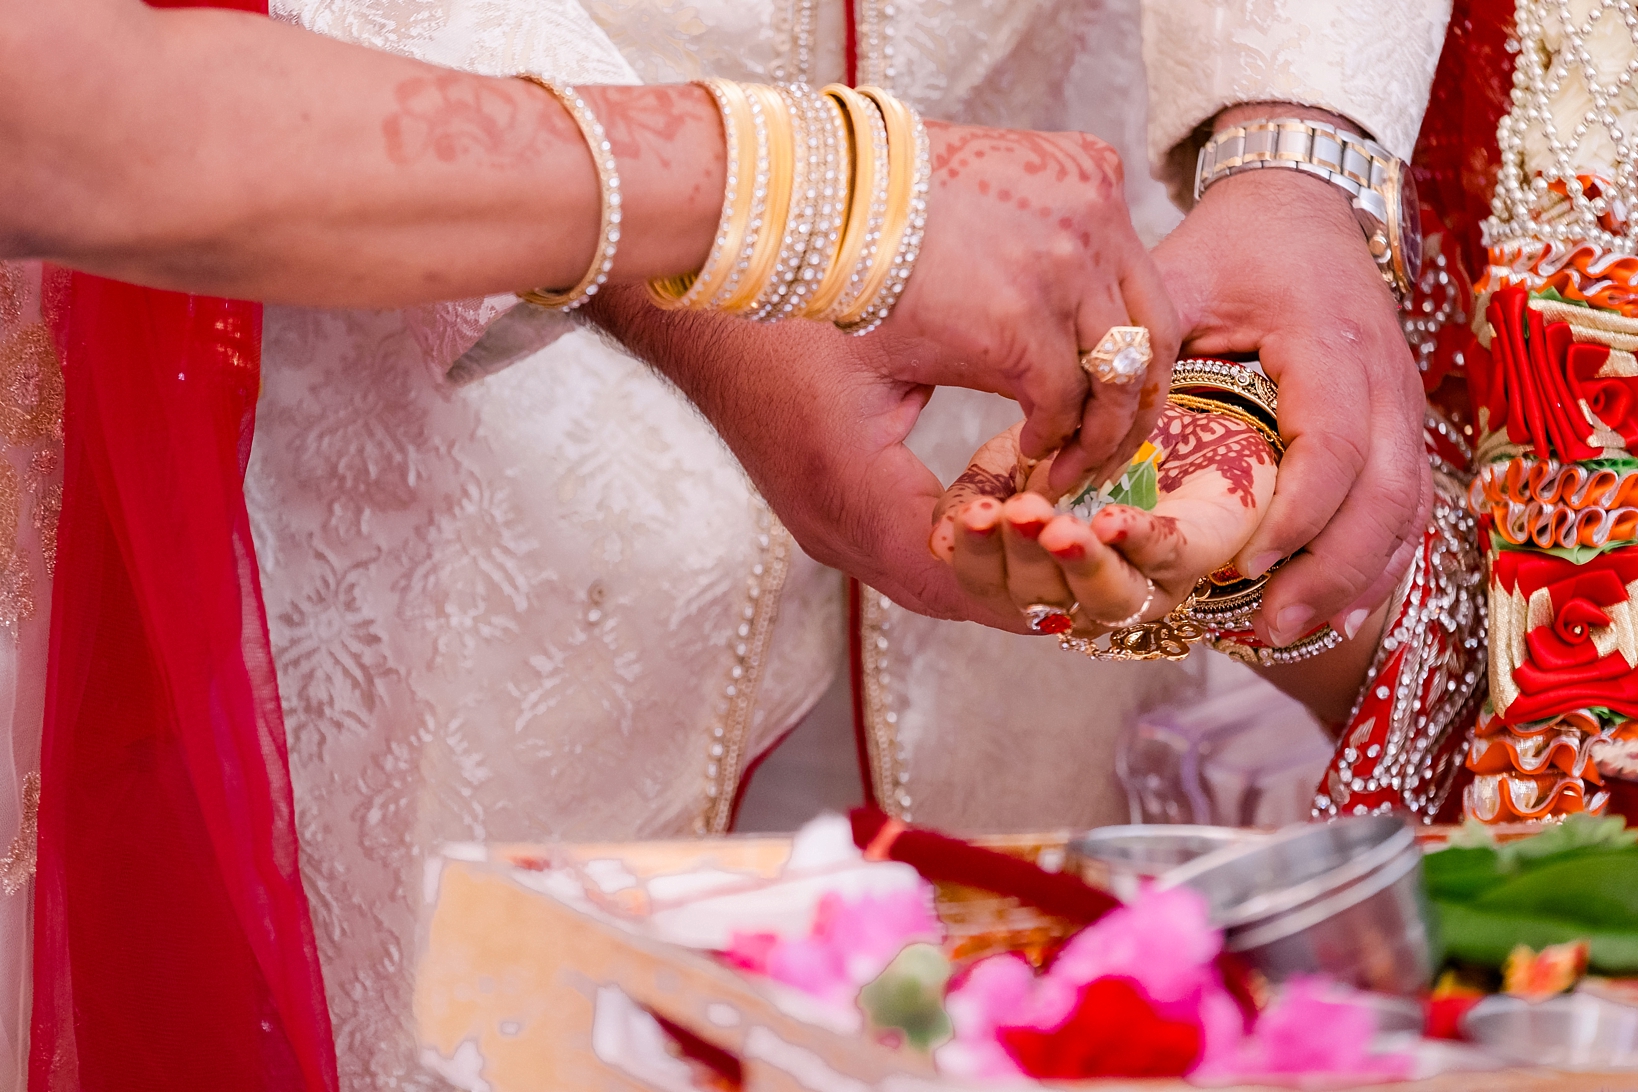 detailed image of the henna covered hands of the bride and groom